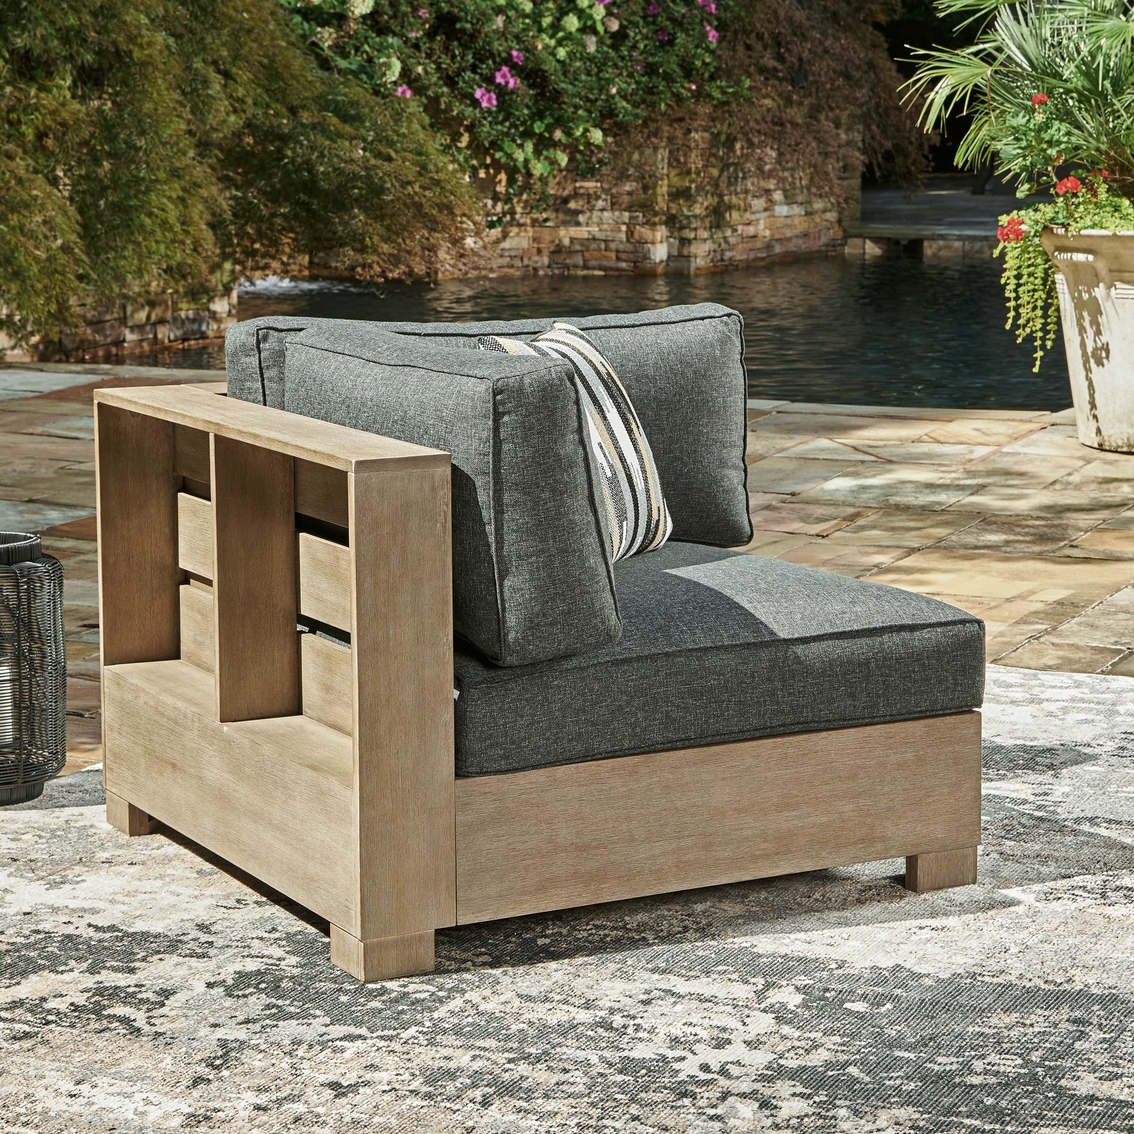 Signature Design by Ashley Citrine Park 2 pc. Outdoor Loveseat - Image 2 of 3